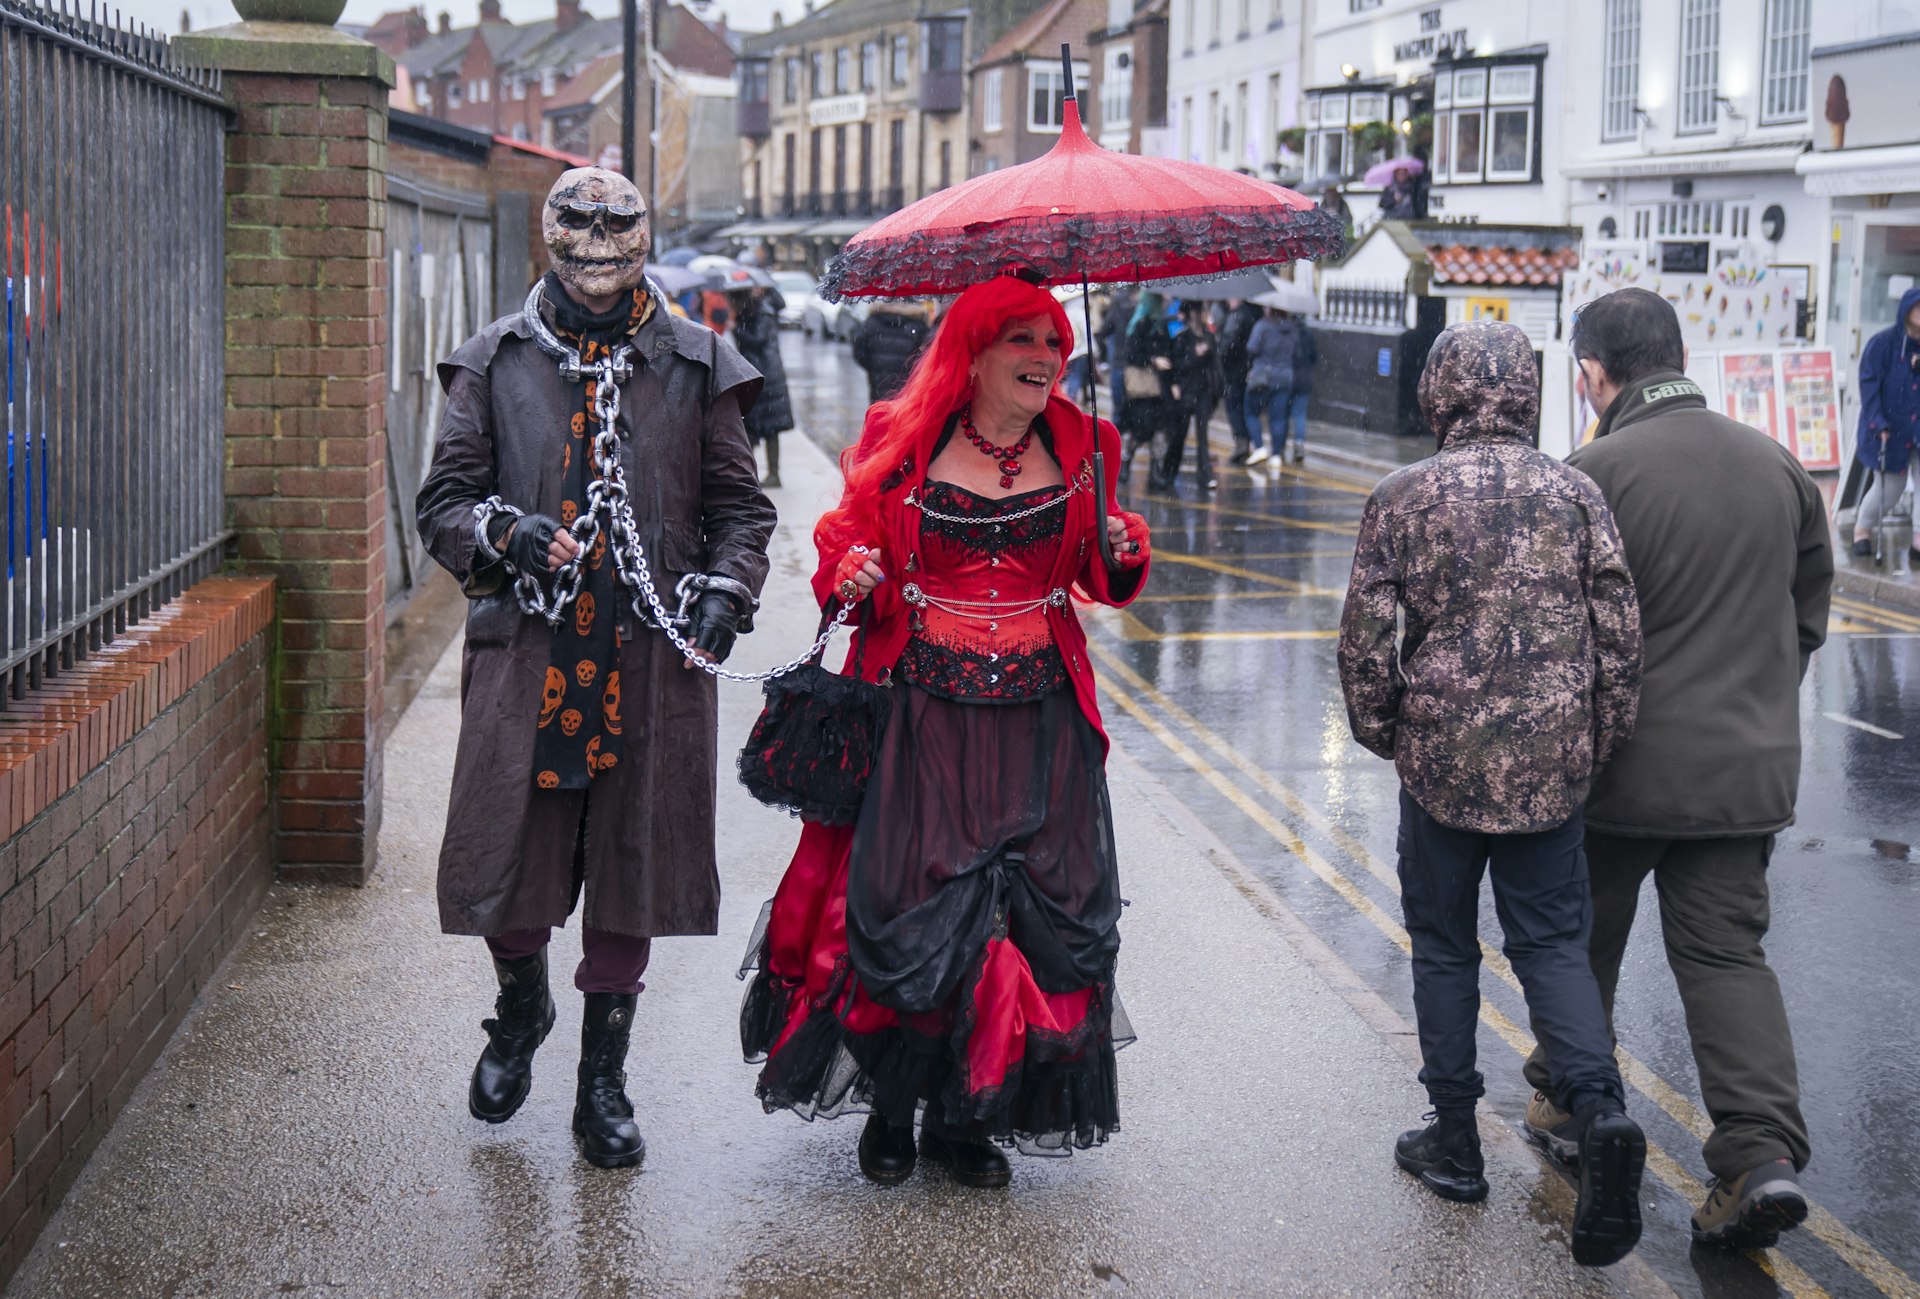 People braving the rain as they attend the Whitby Goth Weekend in Whitby, Yorkshire, England, United Kingdom